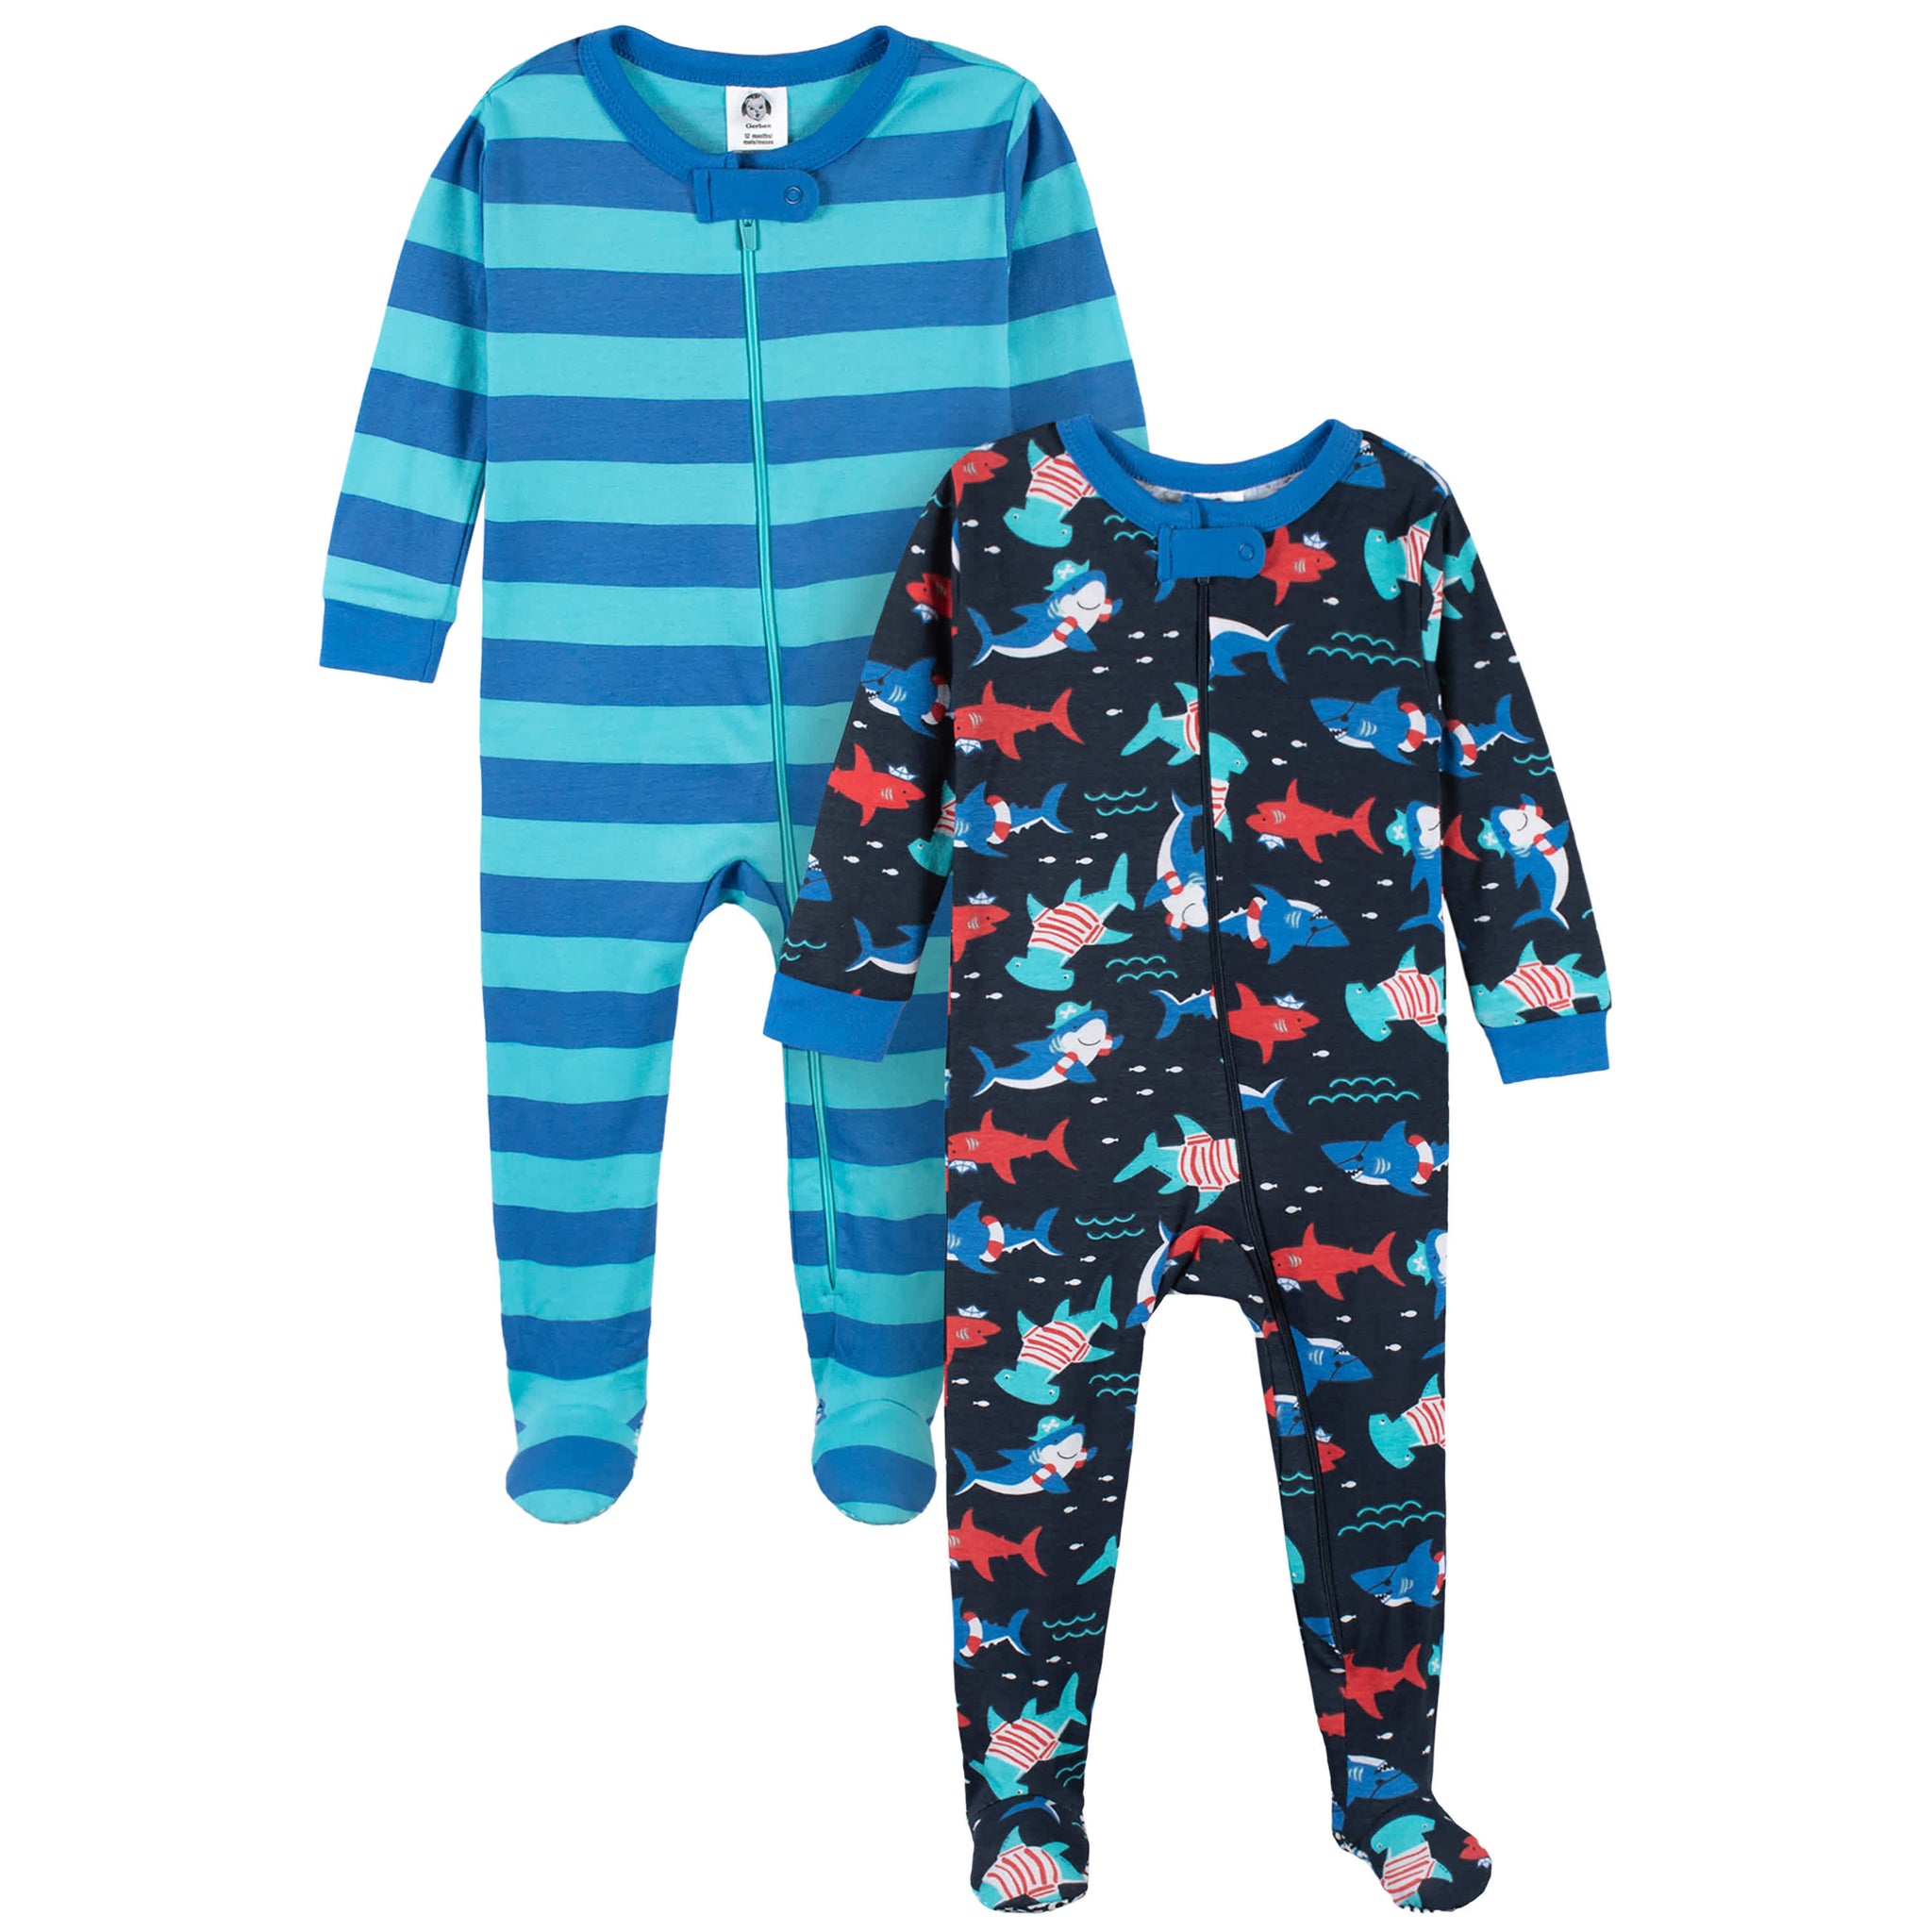 2-Pack Baby & Toddler Boys Shark Zone Snug Fit Footed Cotton Pajamas-Gerber Childrenswear Wholesale